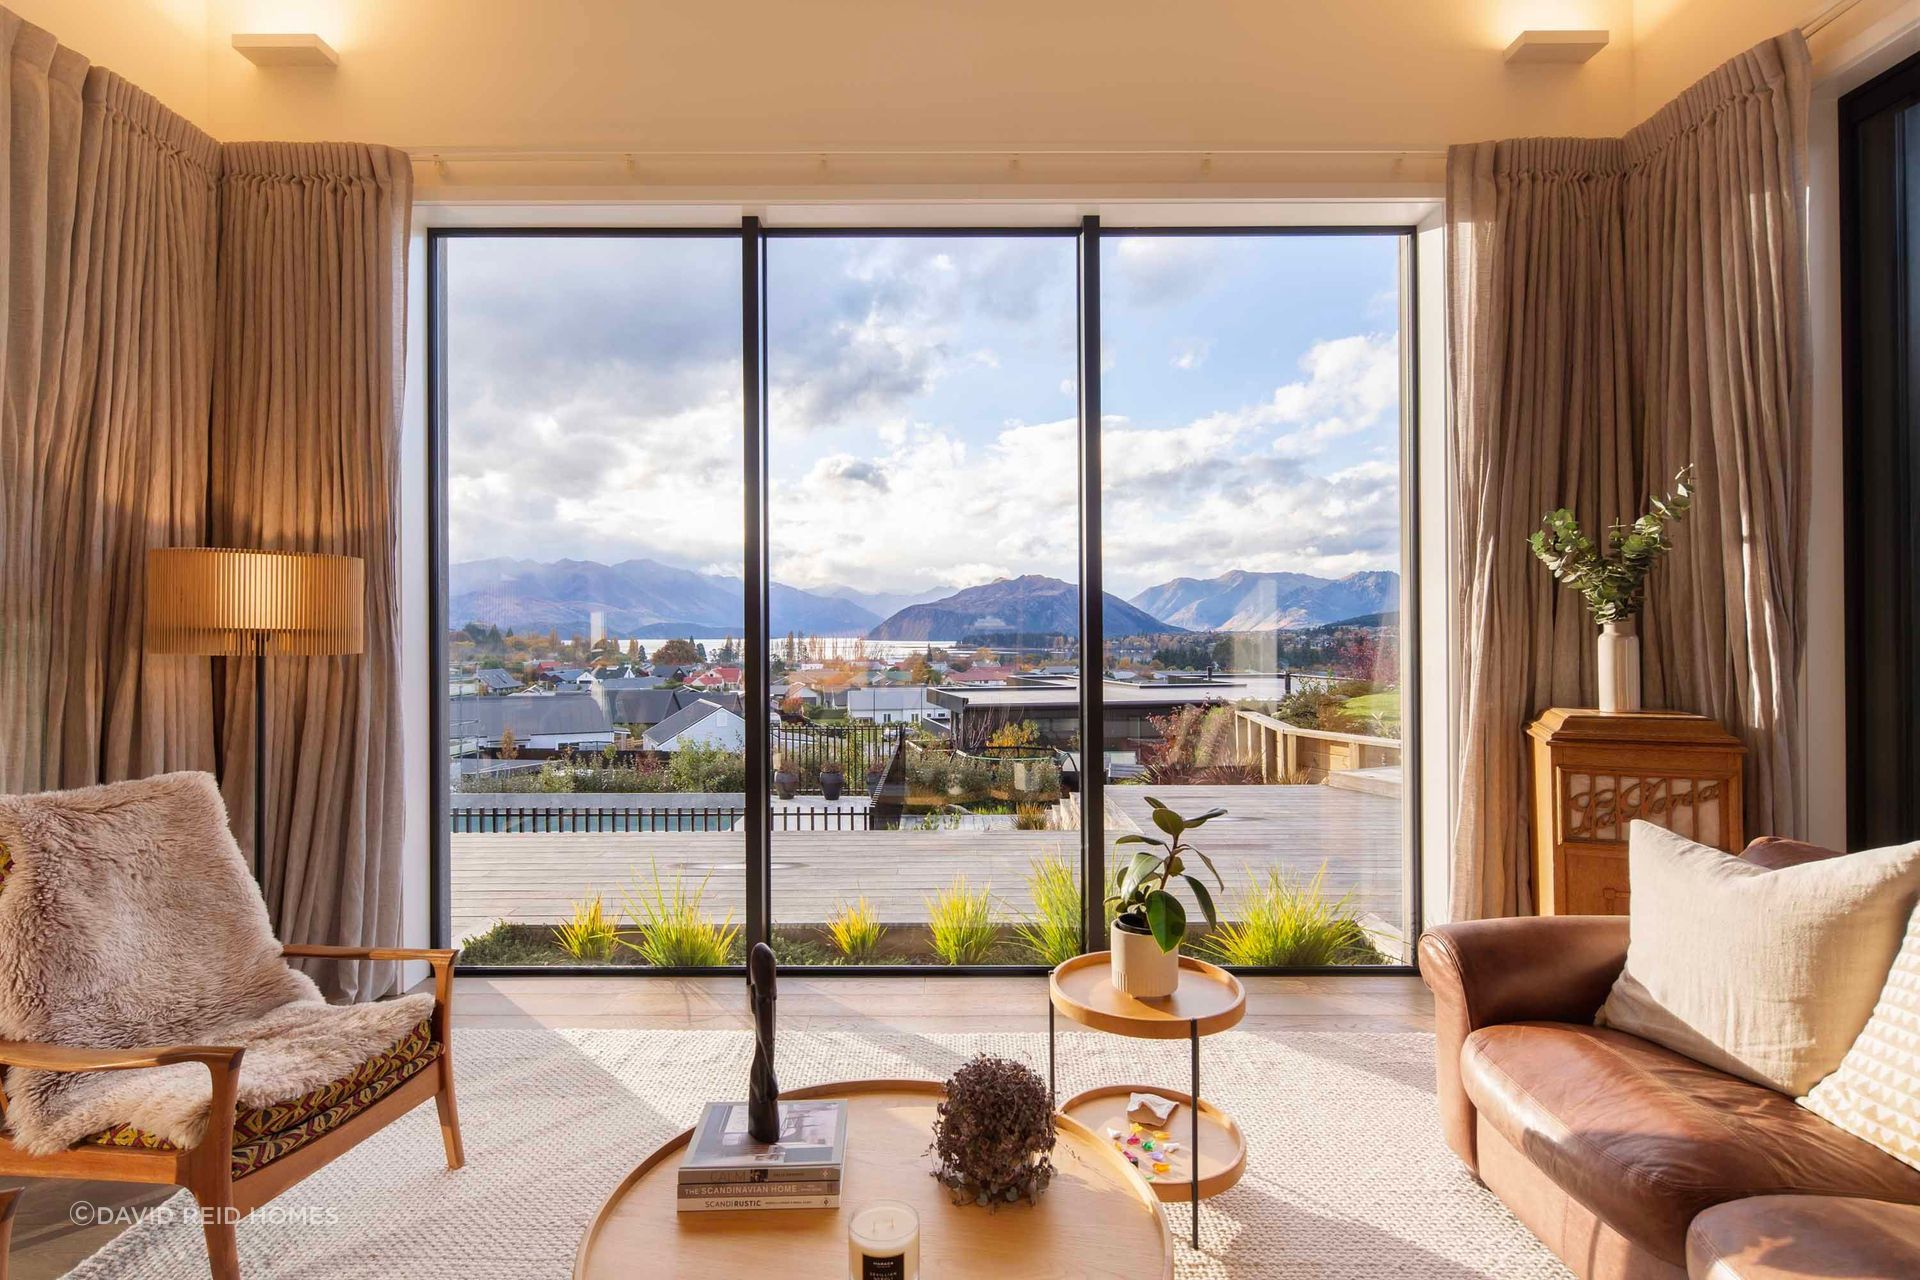 The step-down living room looks out over Lake Wānaka.